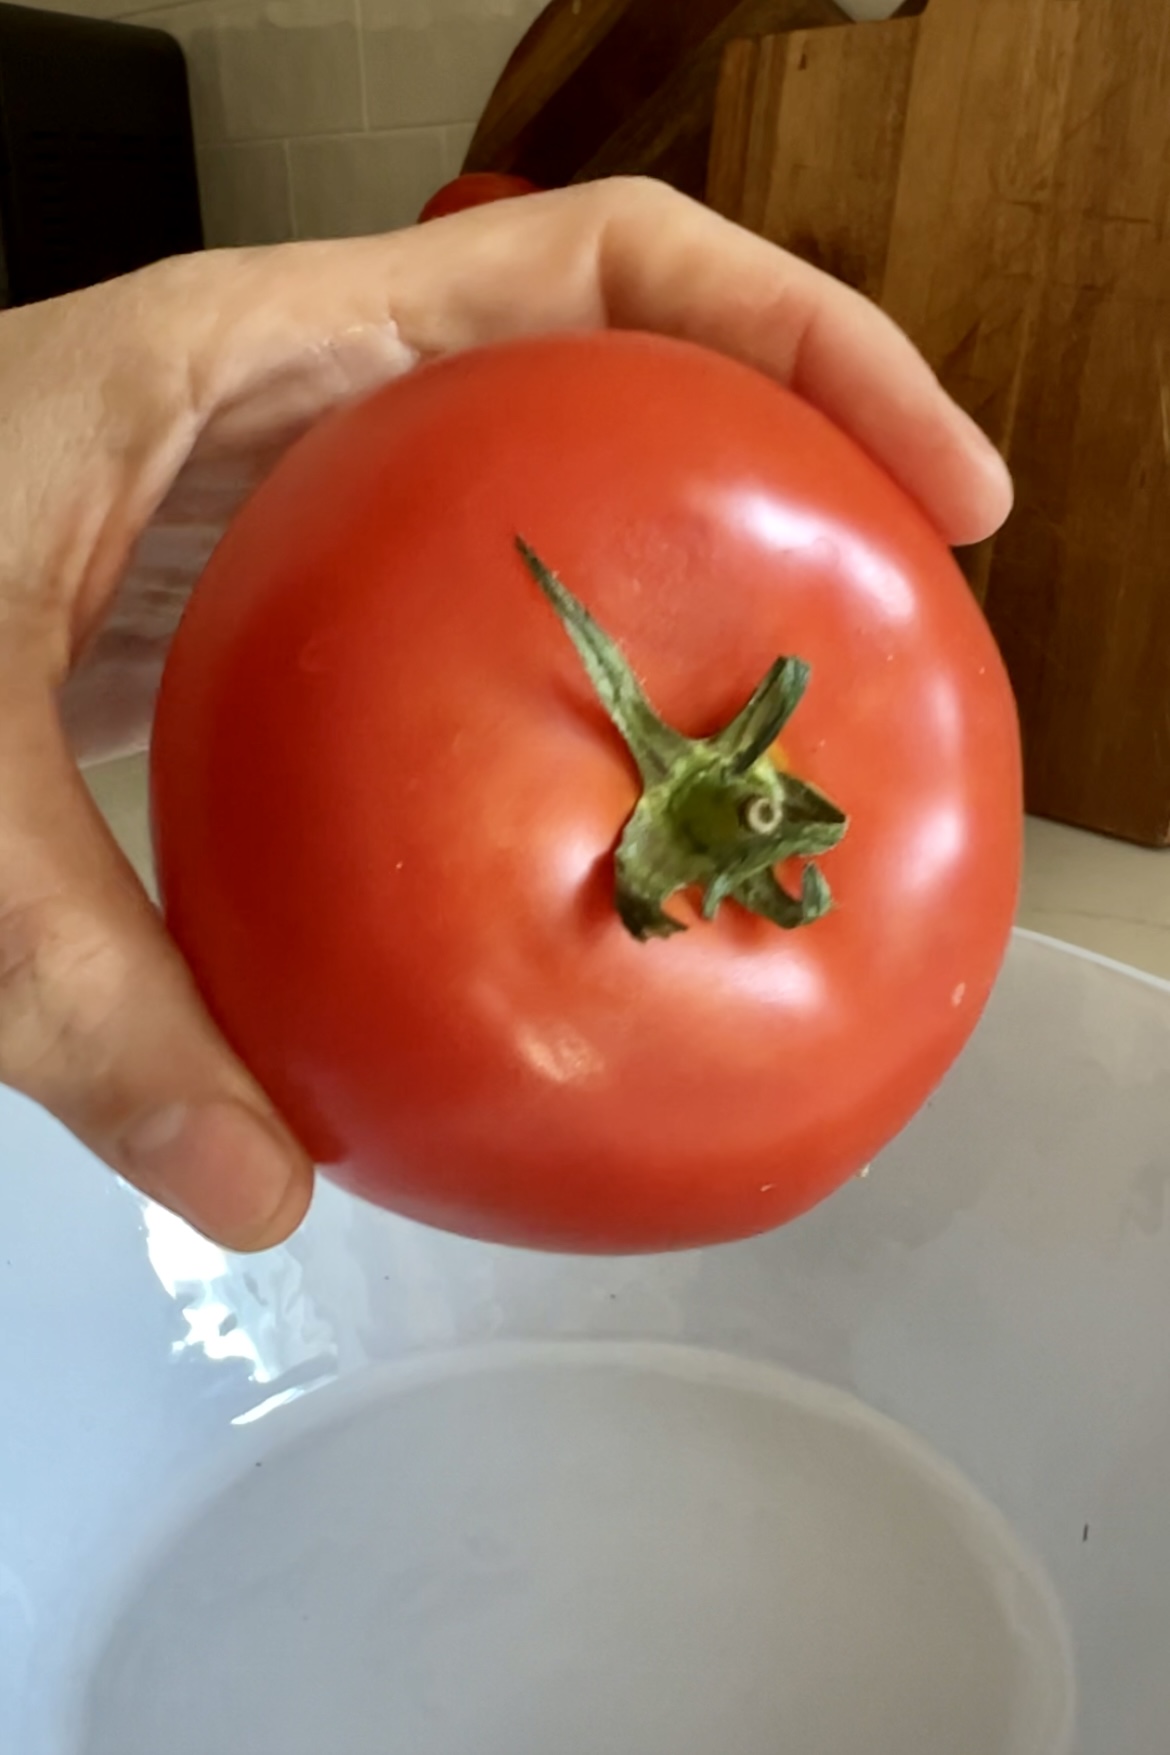 A hand holding a large, ripe red tomato with a green stem over a white container. The background includes a wooden structure, possibly a table or counter, and a tiled wall. The tomato looks fresh and vibrant, perfect for preparing Pan Con Tomate.